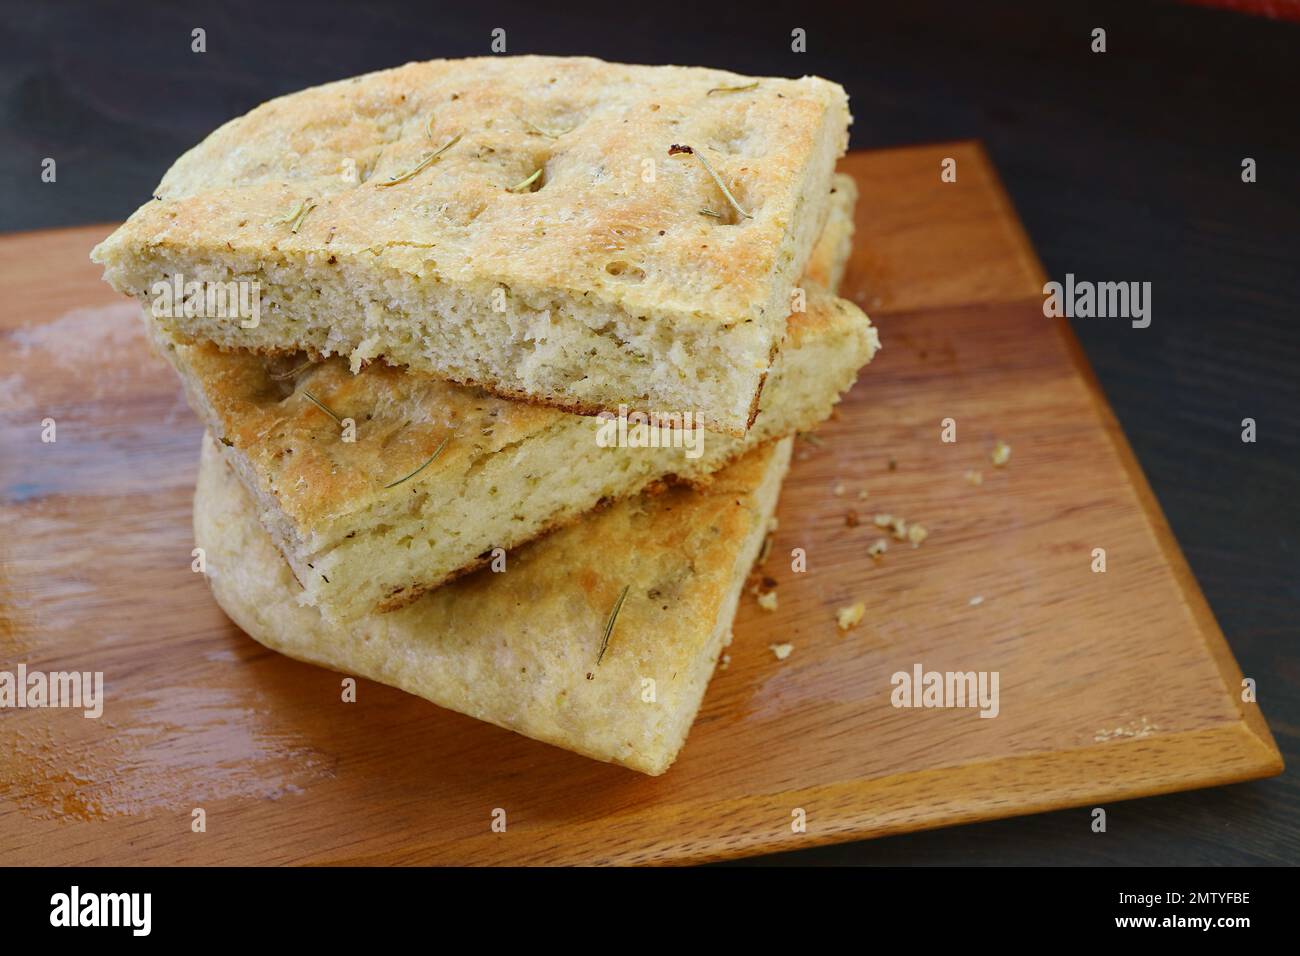 Stack of Rosemary Focaccia Bread Slices on Wooden Breadboard Stock Photo